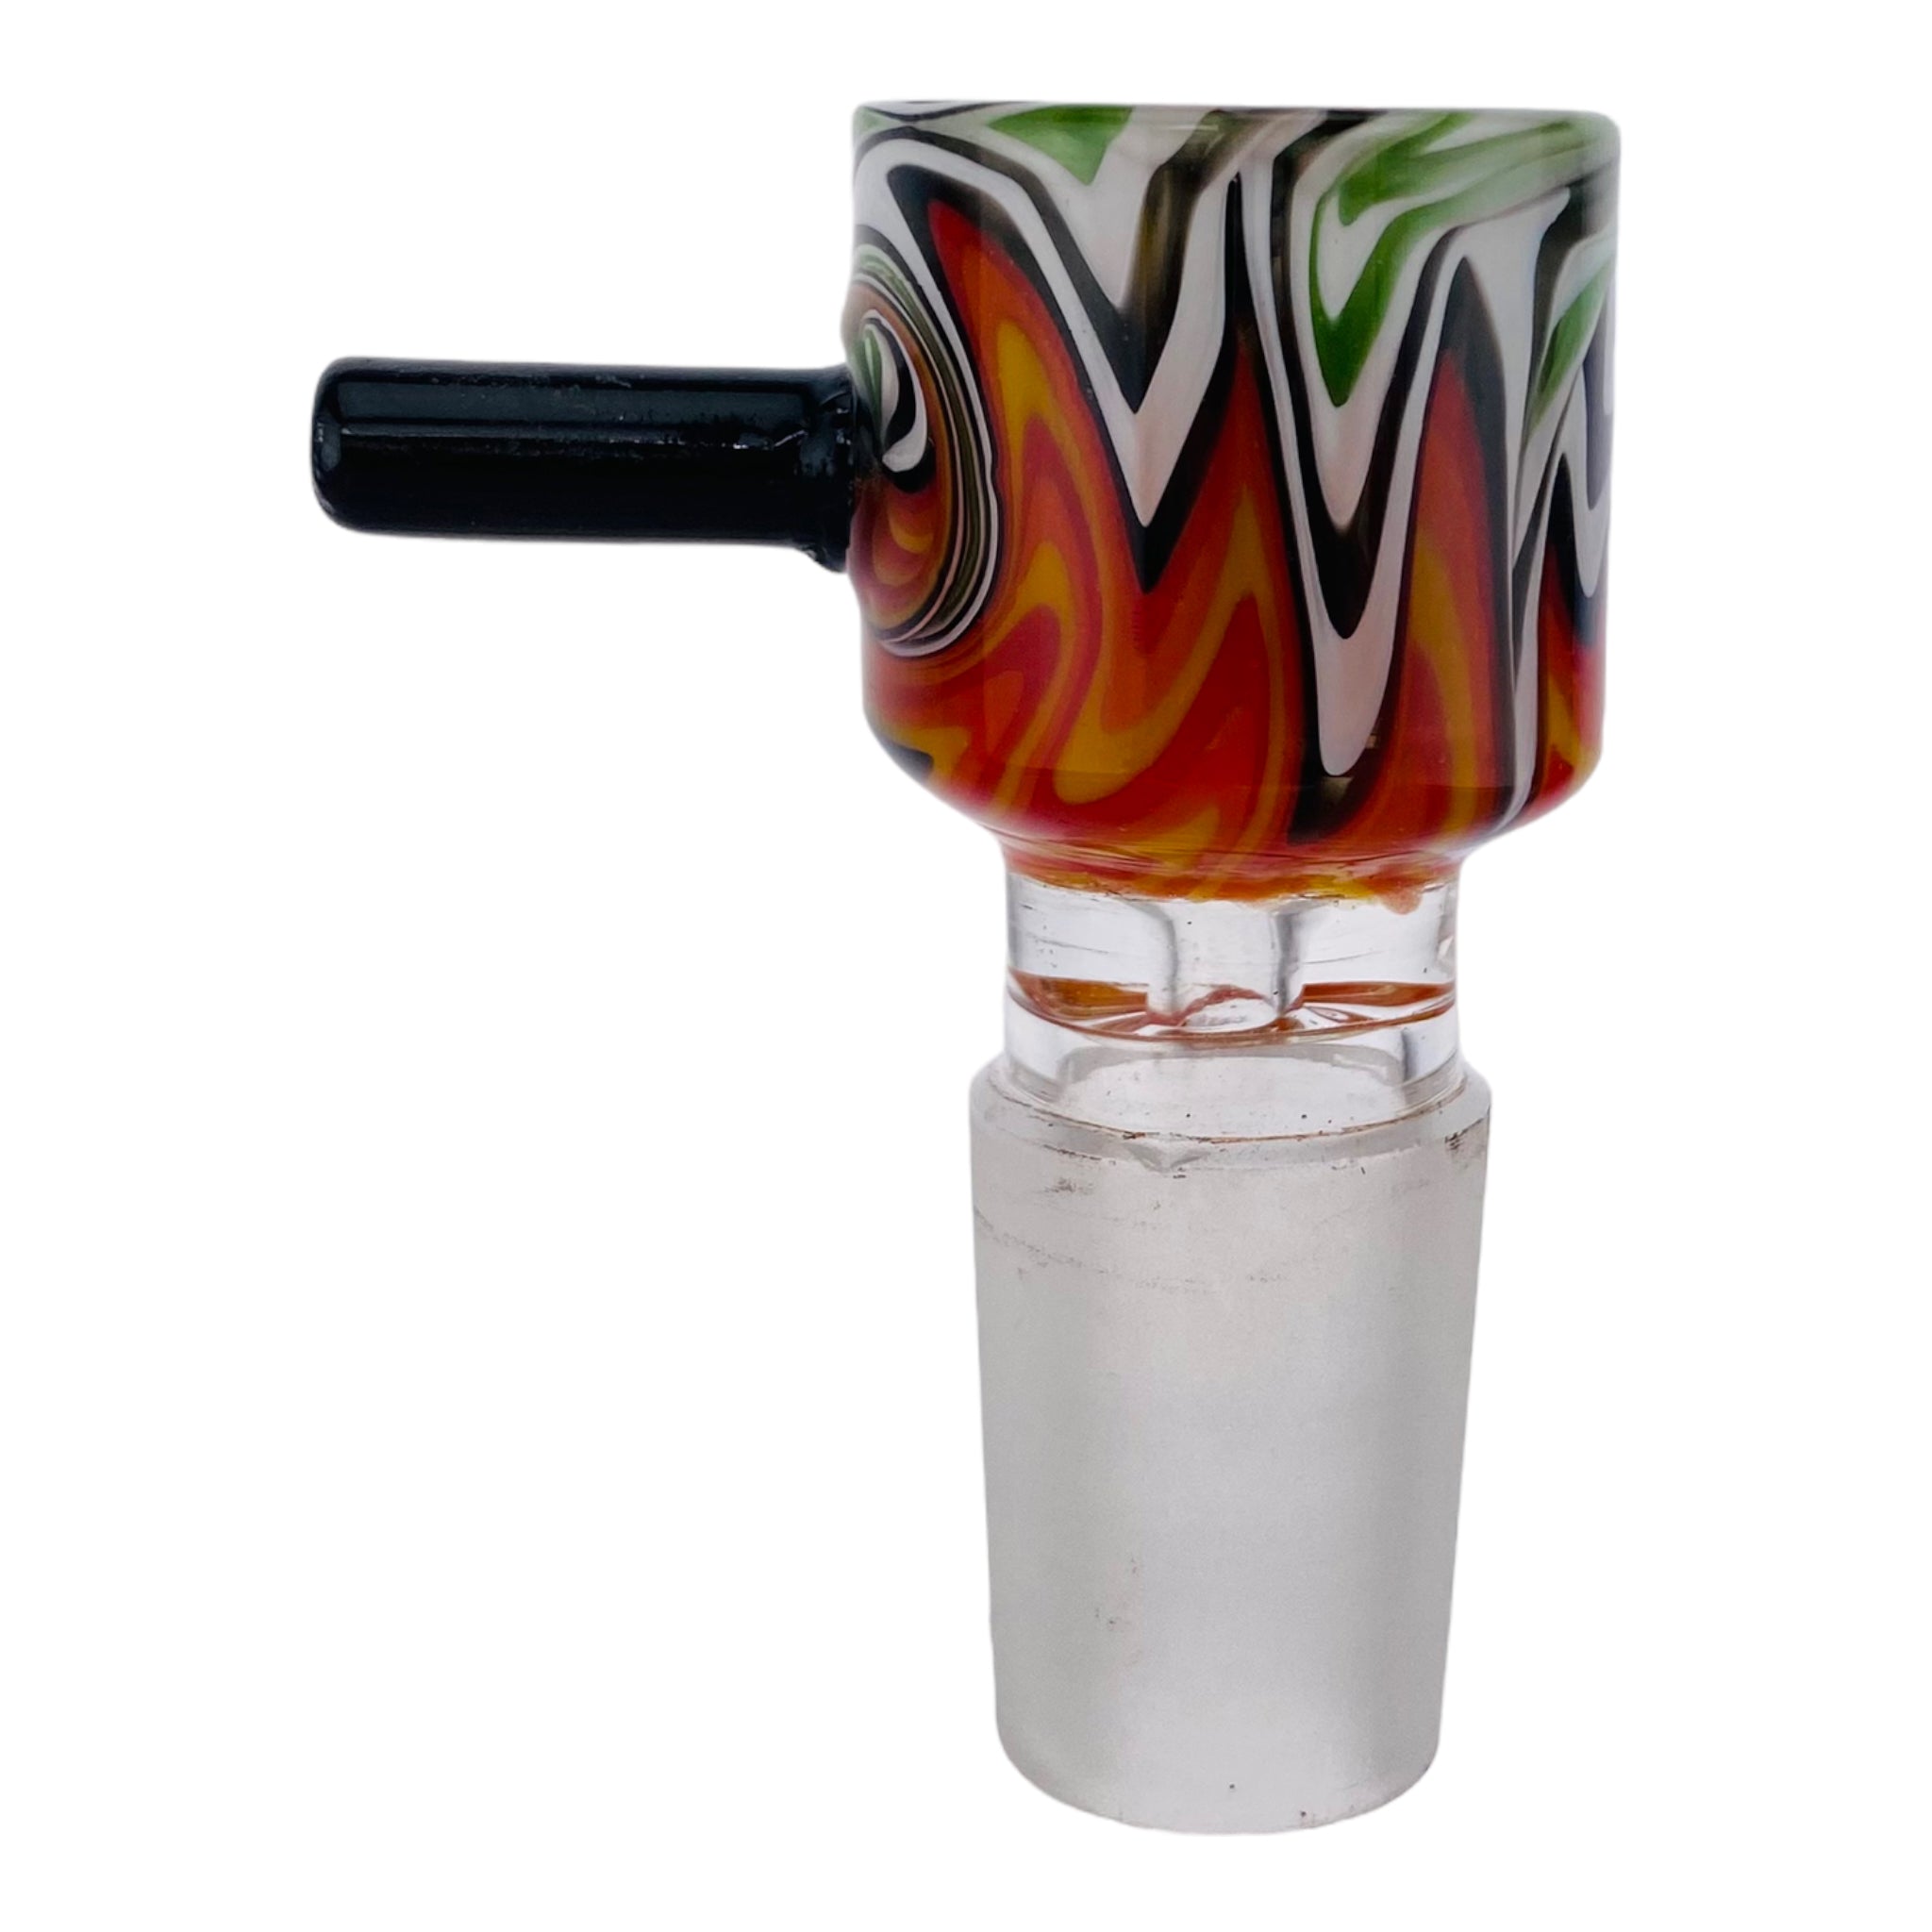 18mm Flower Bowl - Multi Color Cylinder Straight Wall Bong Bowl Piece